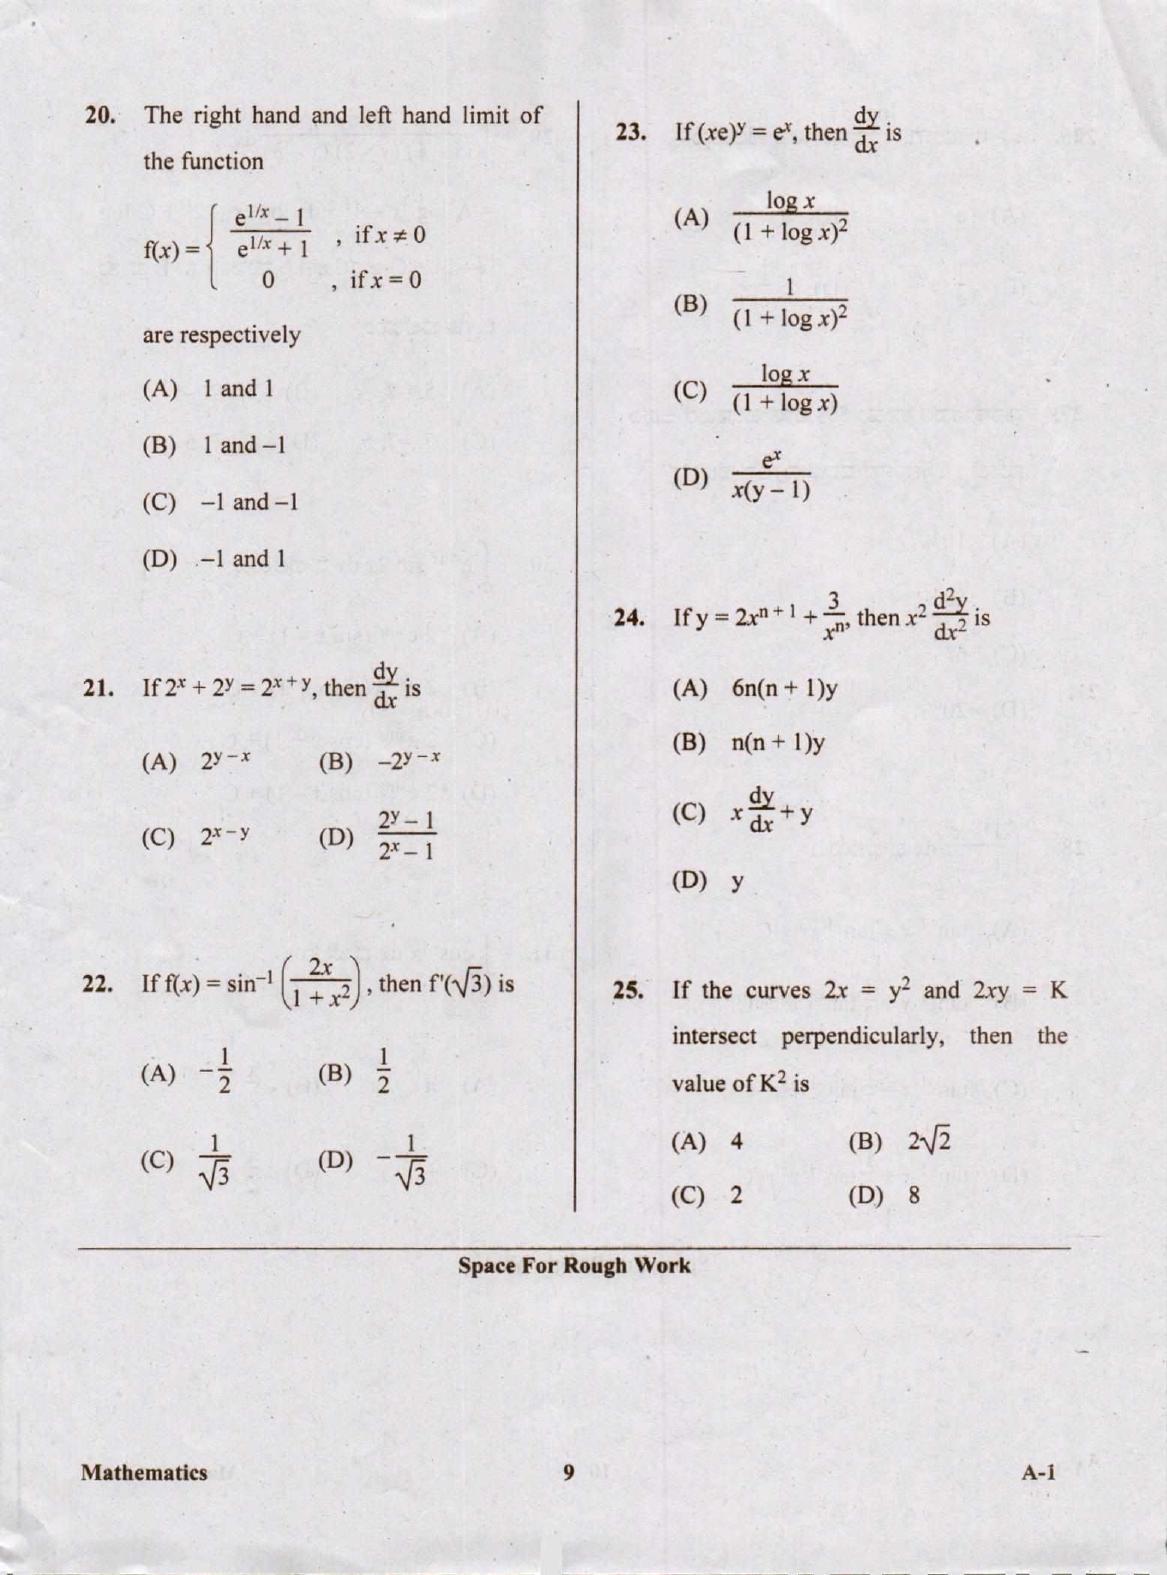 KCET Mathematics 2020 Question Papers - Page 9